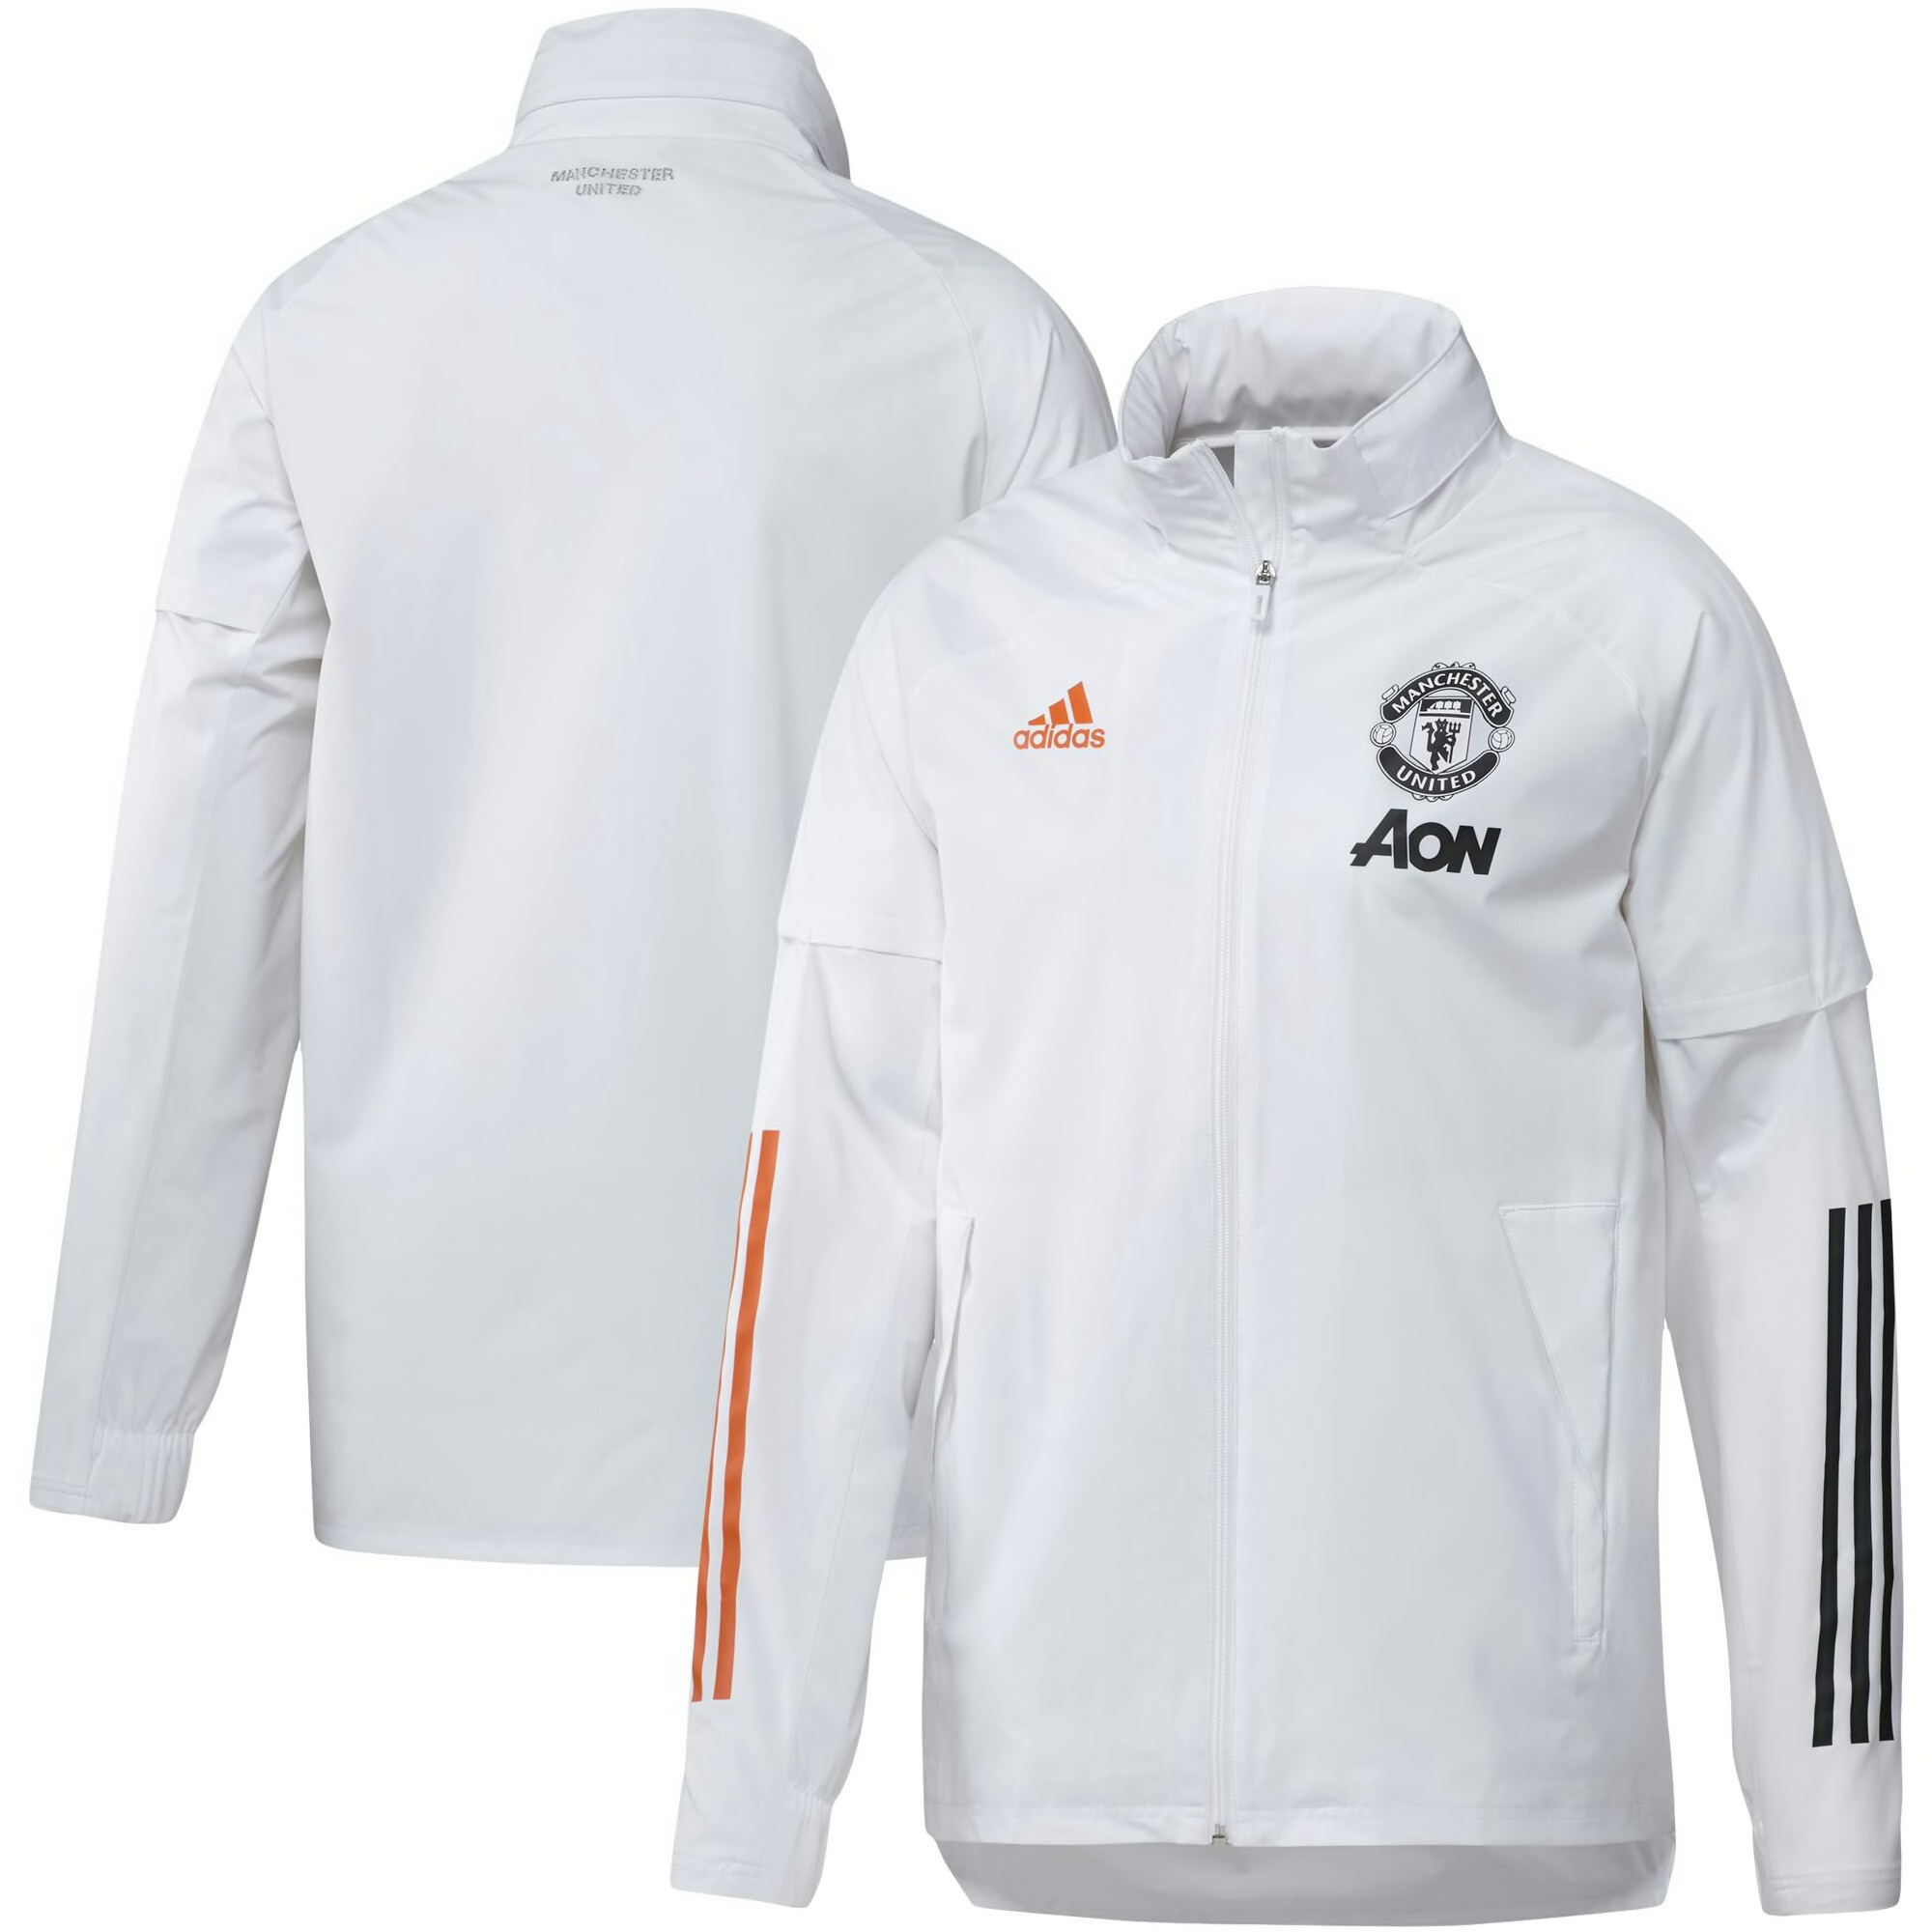 manchester united hoodie 2020